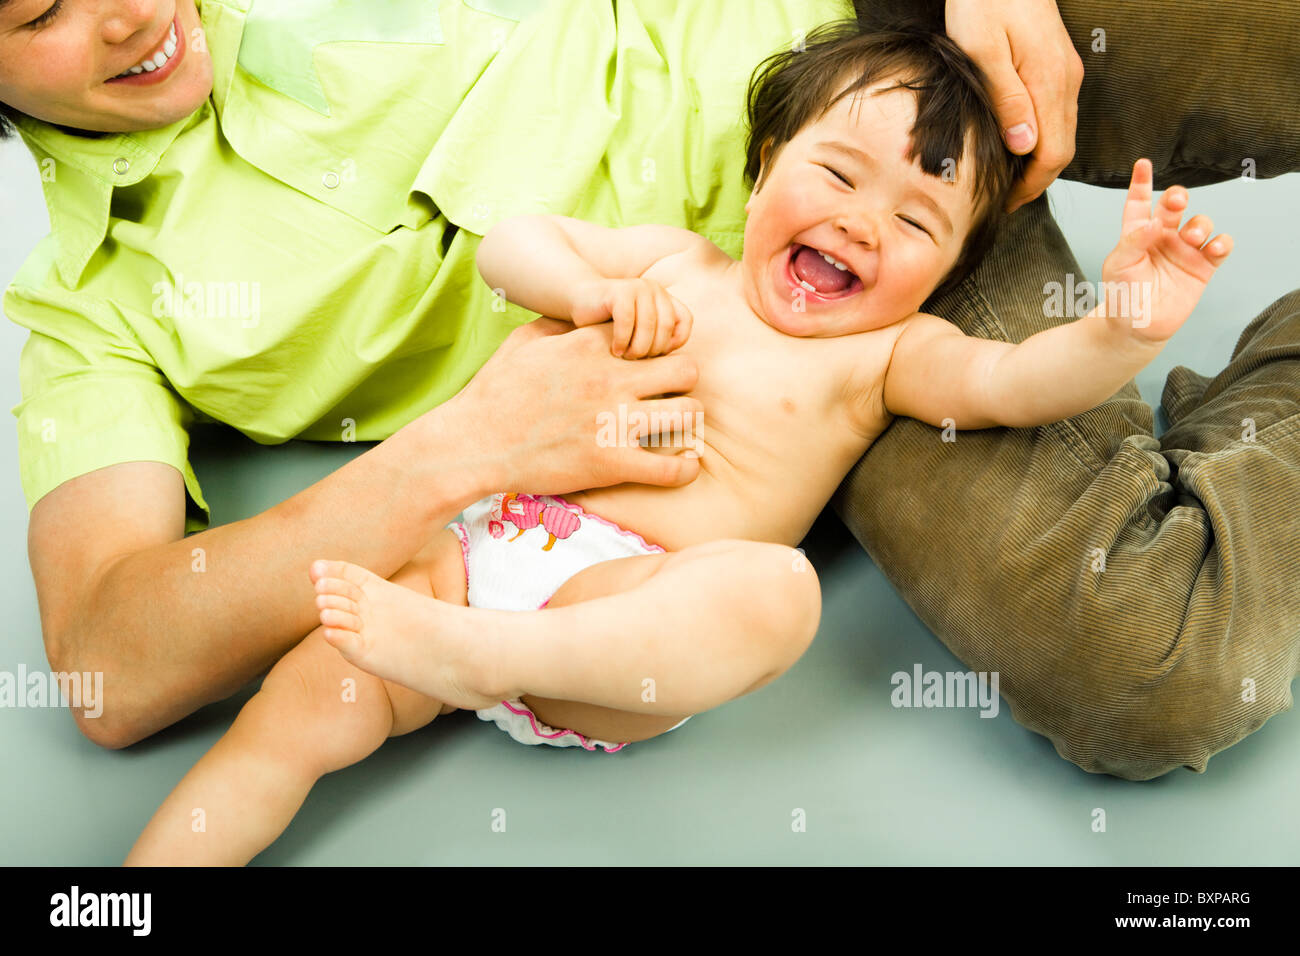 Close-up of joyful child lying on the floor and laughing from tickling Stock Photo